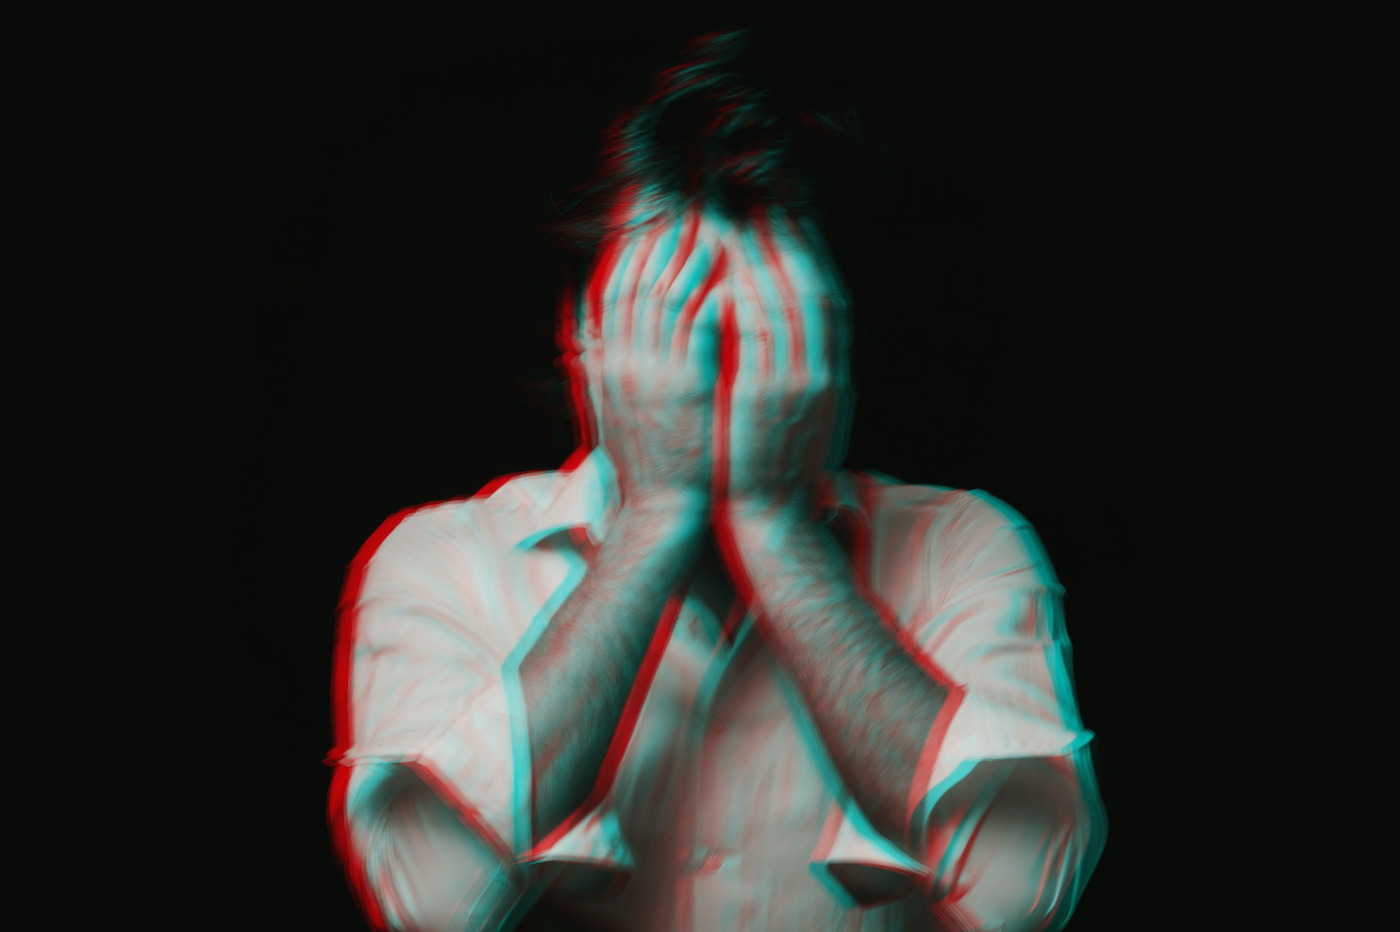 Abstract blurry portrait of a depressed man with mental personality disorders